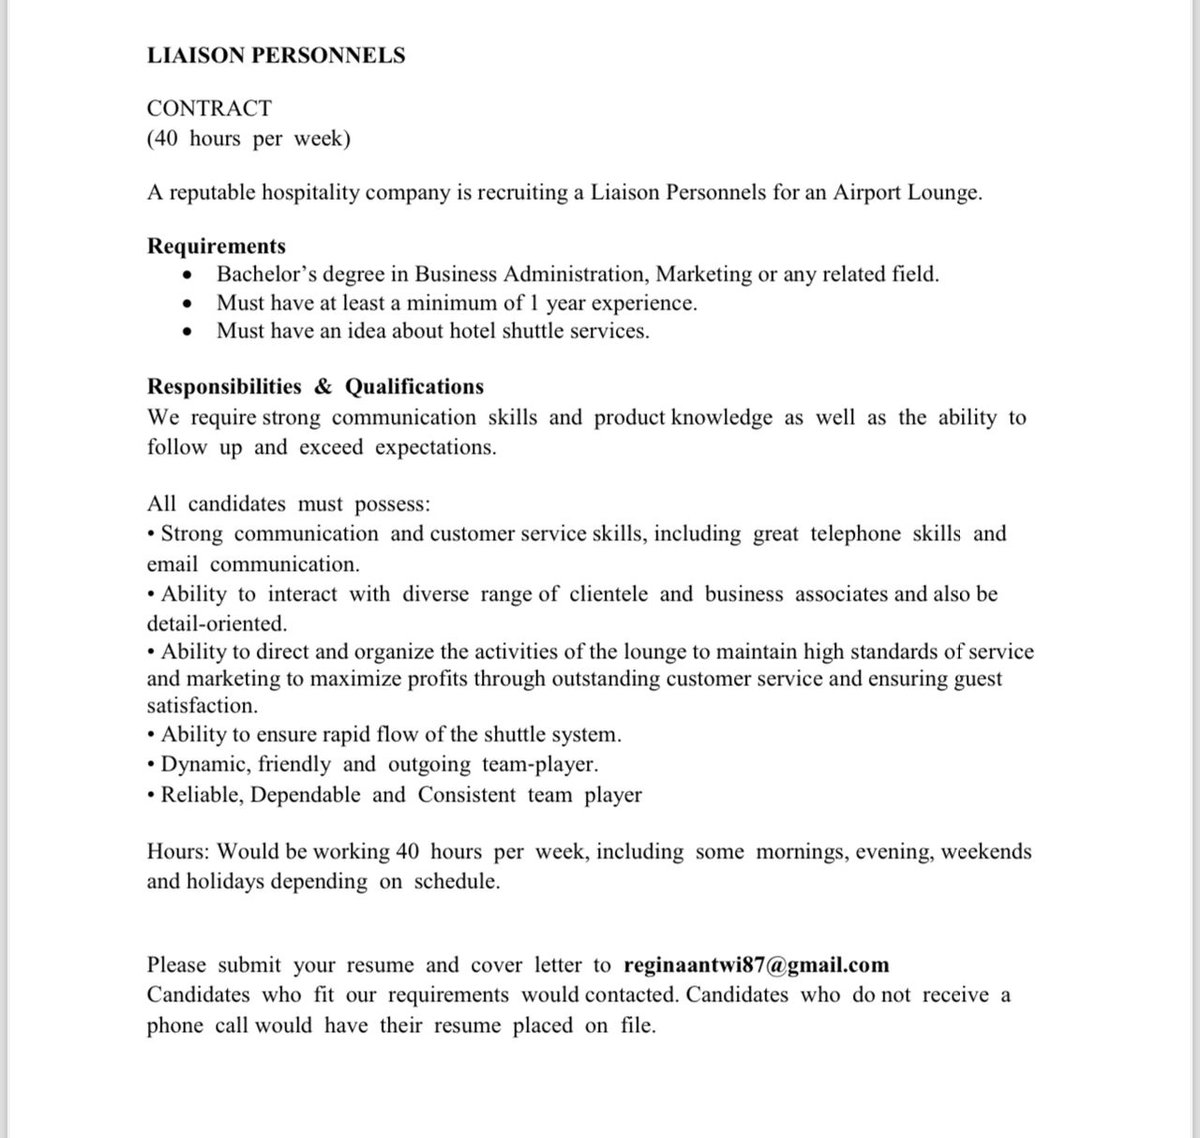 Liaison personnel needed Please submit your resume and cover letter to reginaantwi87@gmail.com. Candidates who fit our requirements would contacted. Candidates who do not receive phone call would have their resume placed on file.